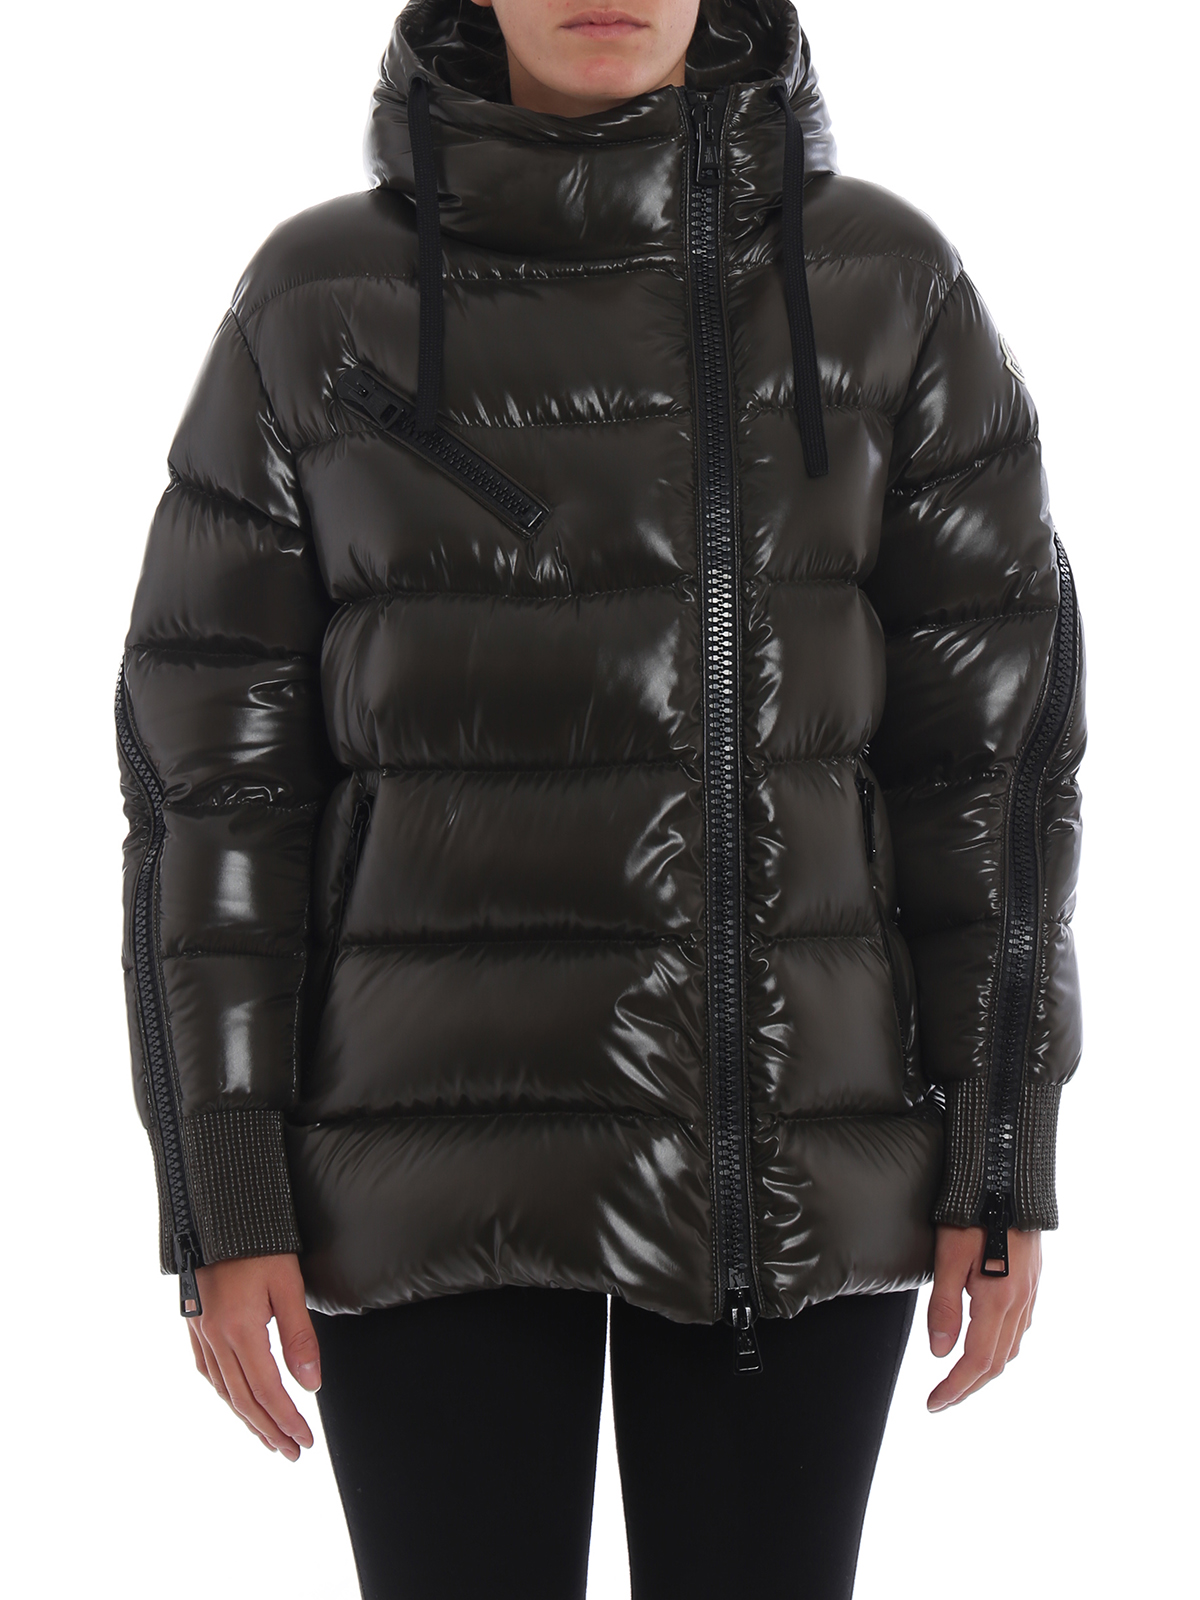 moncler liriope red